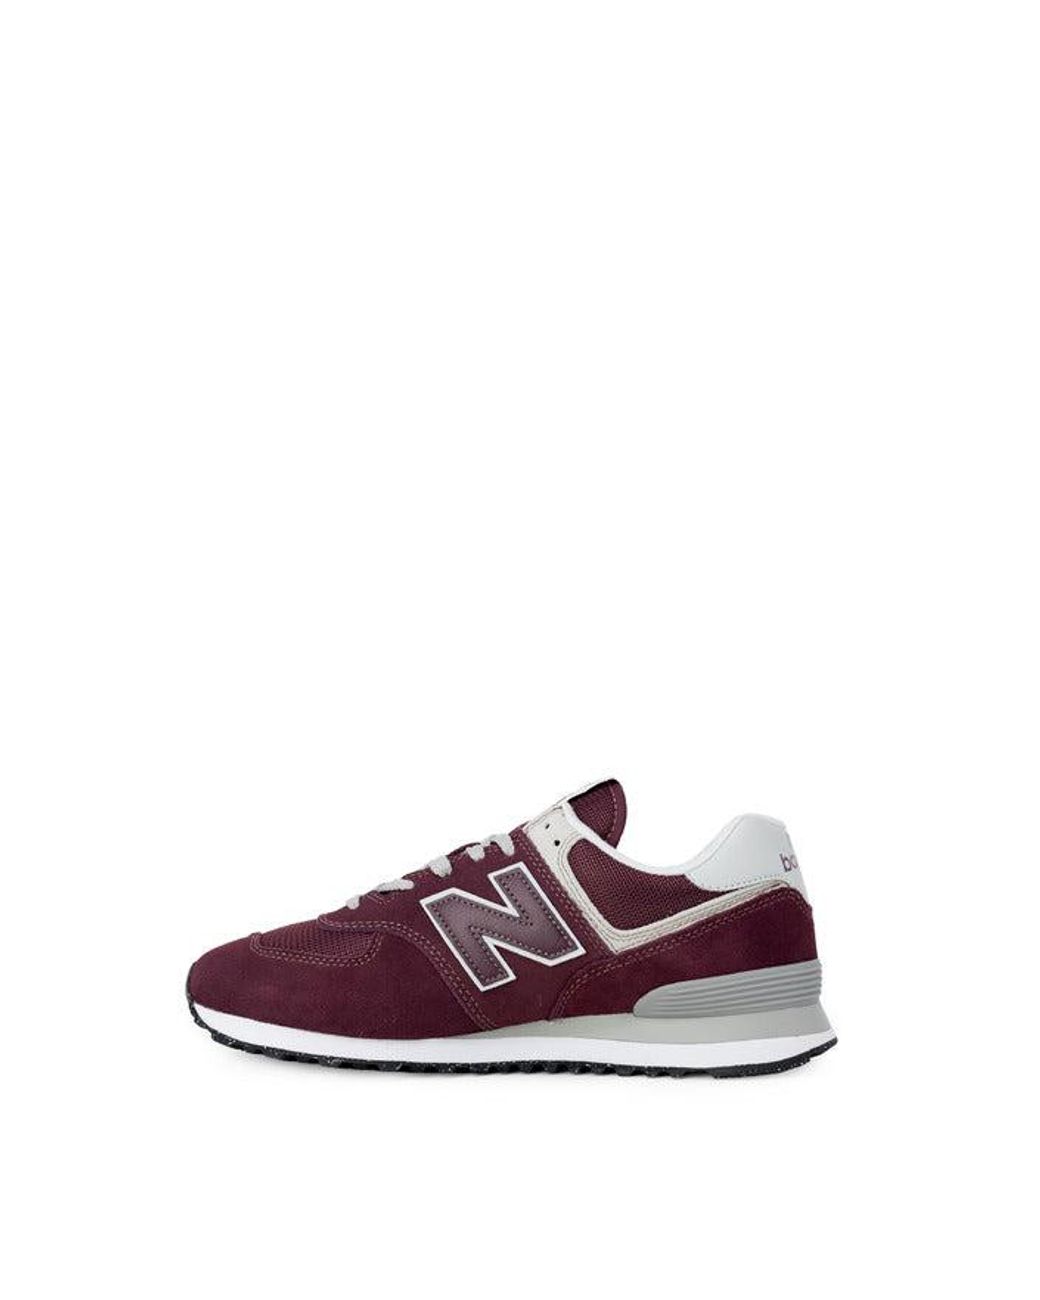 New Balance Synthetic Men Sneakers in Bordeaux (Red) for Men - Save 12% |  Lyst